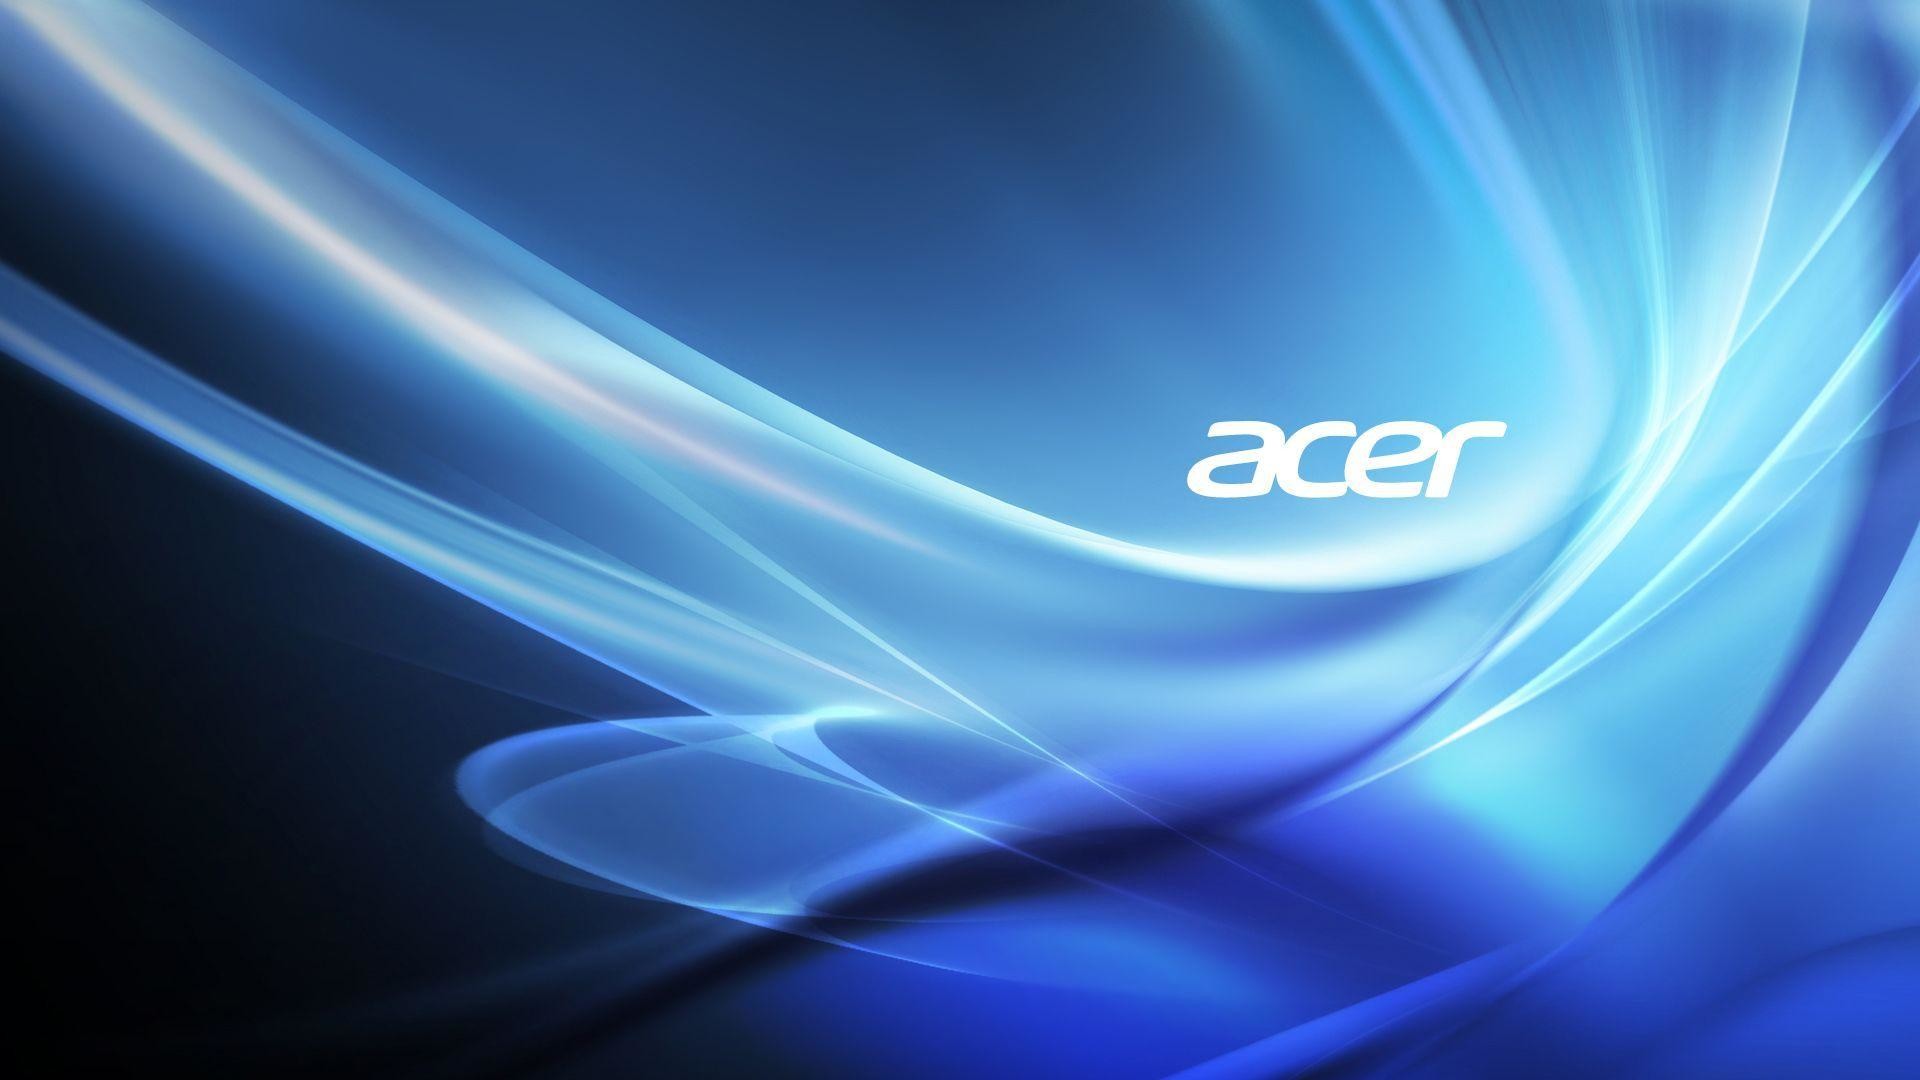 Acer t04 - Der absolute TOP-Favorit unseres Teams